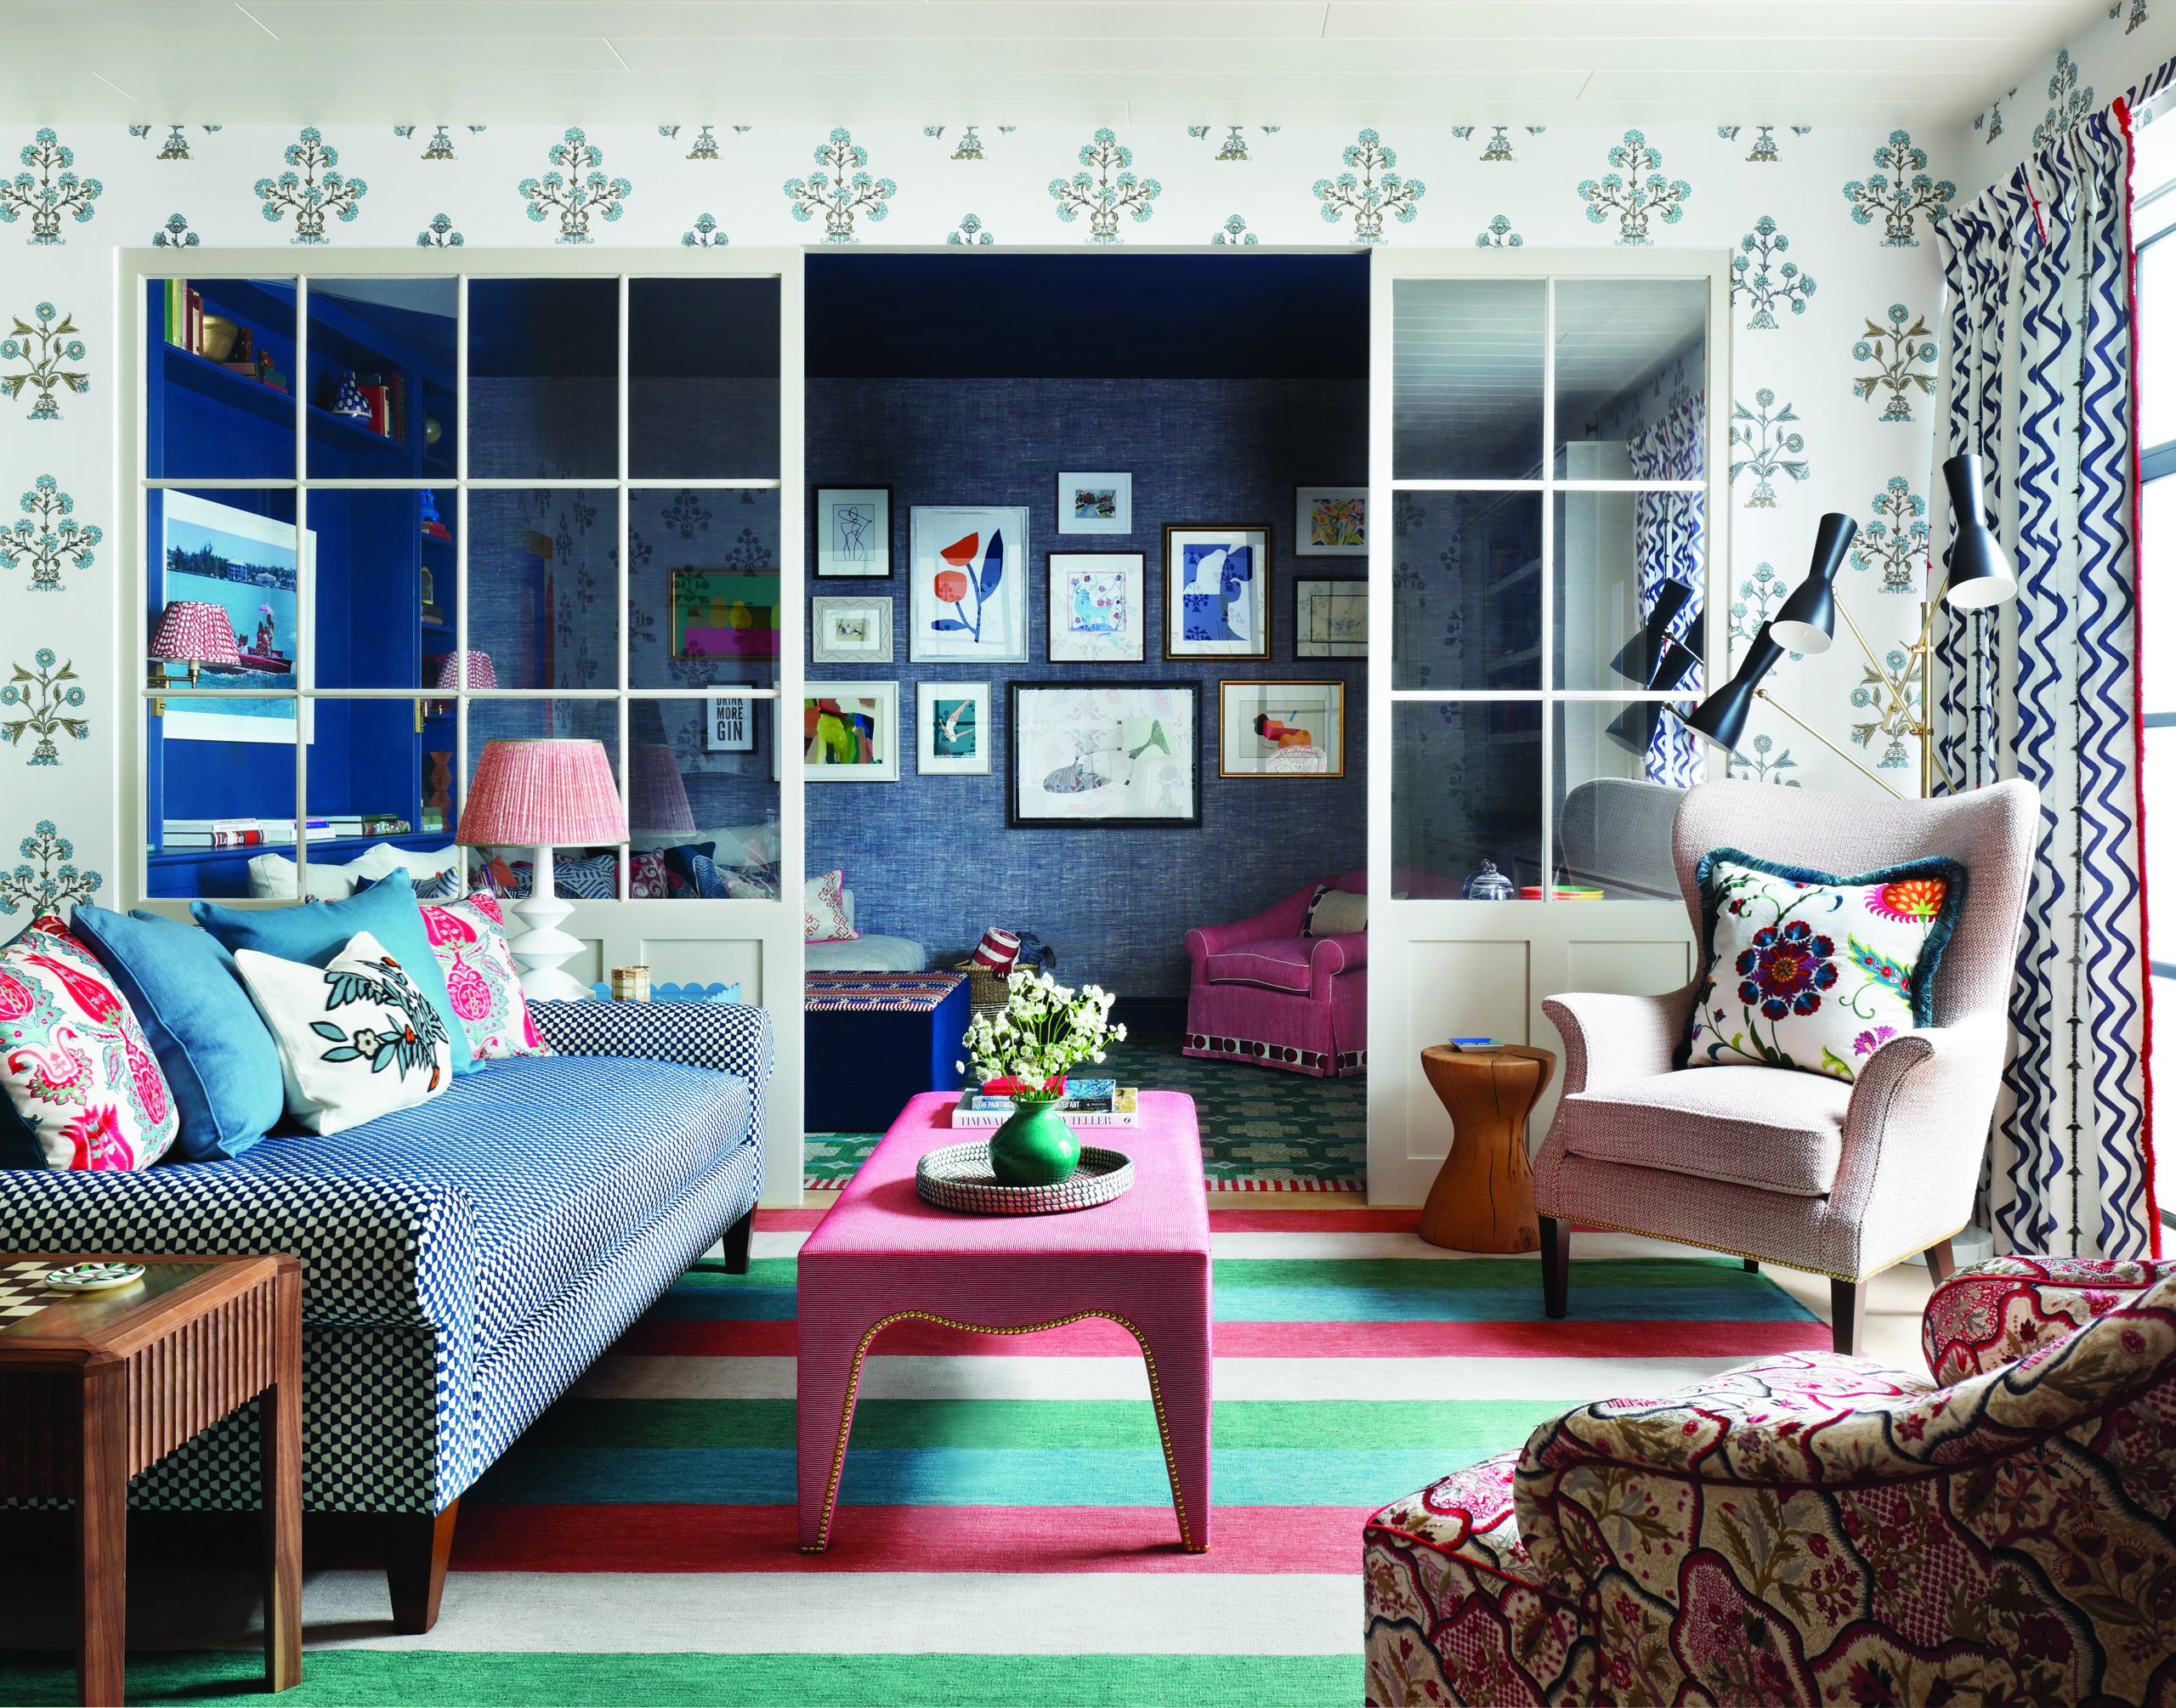 A bright and colourful living room with lots of pattern